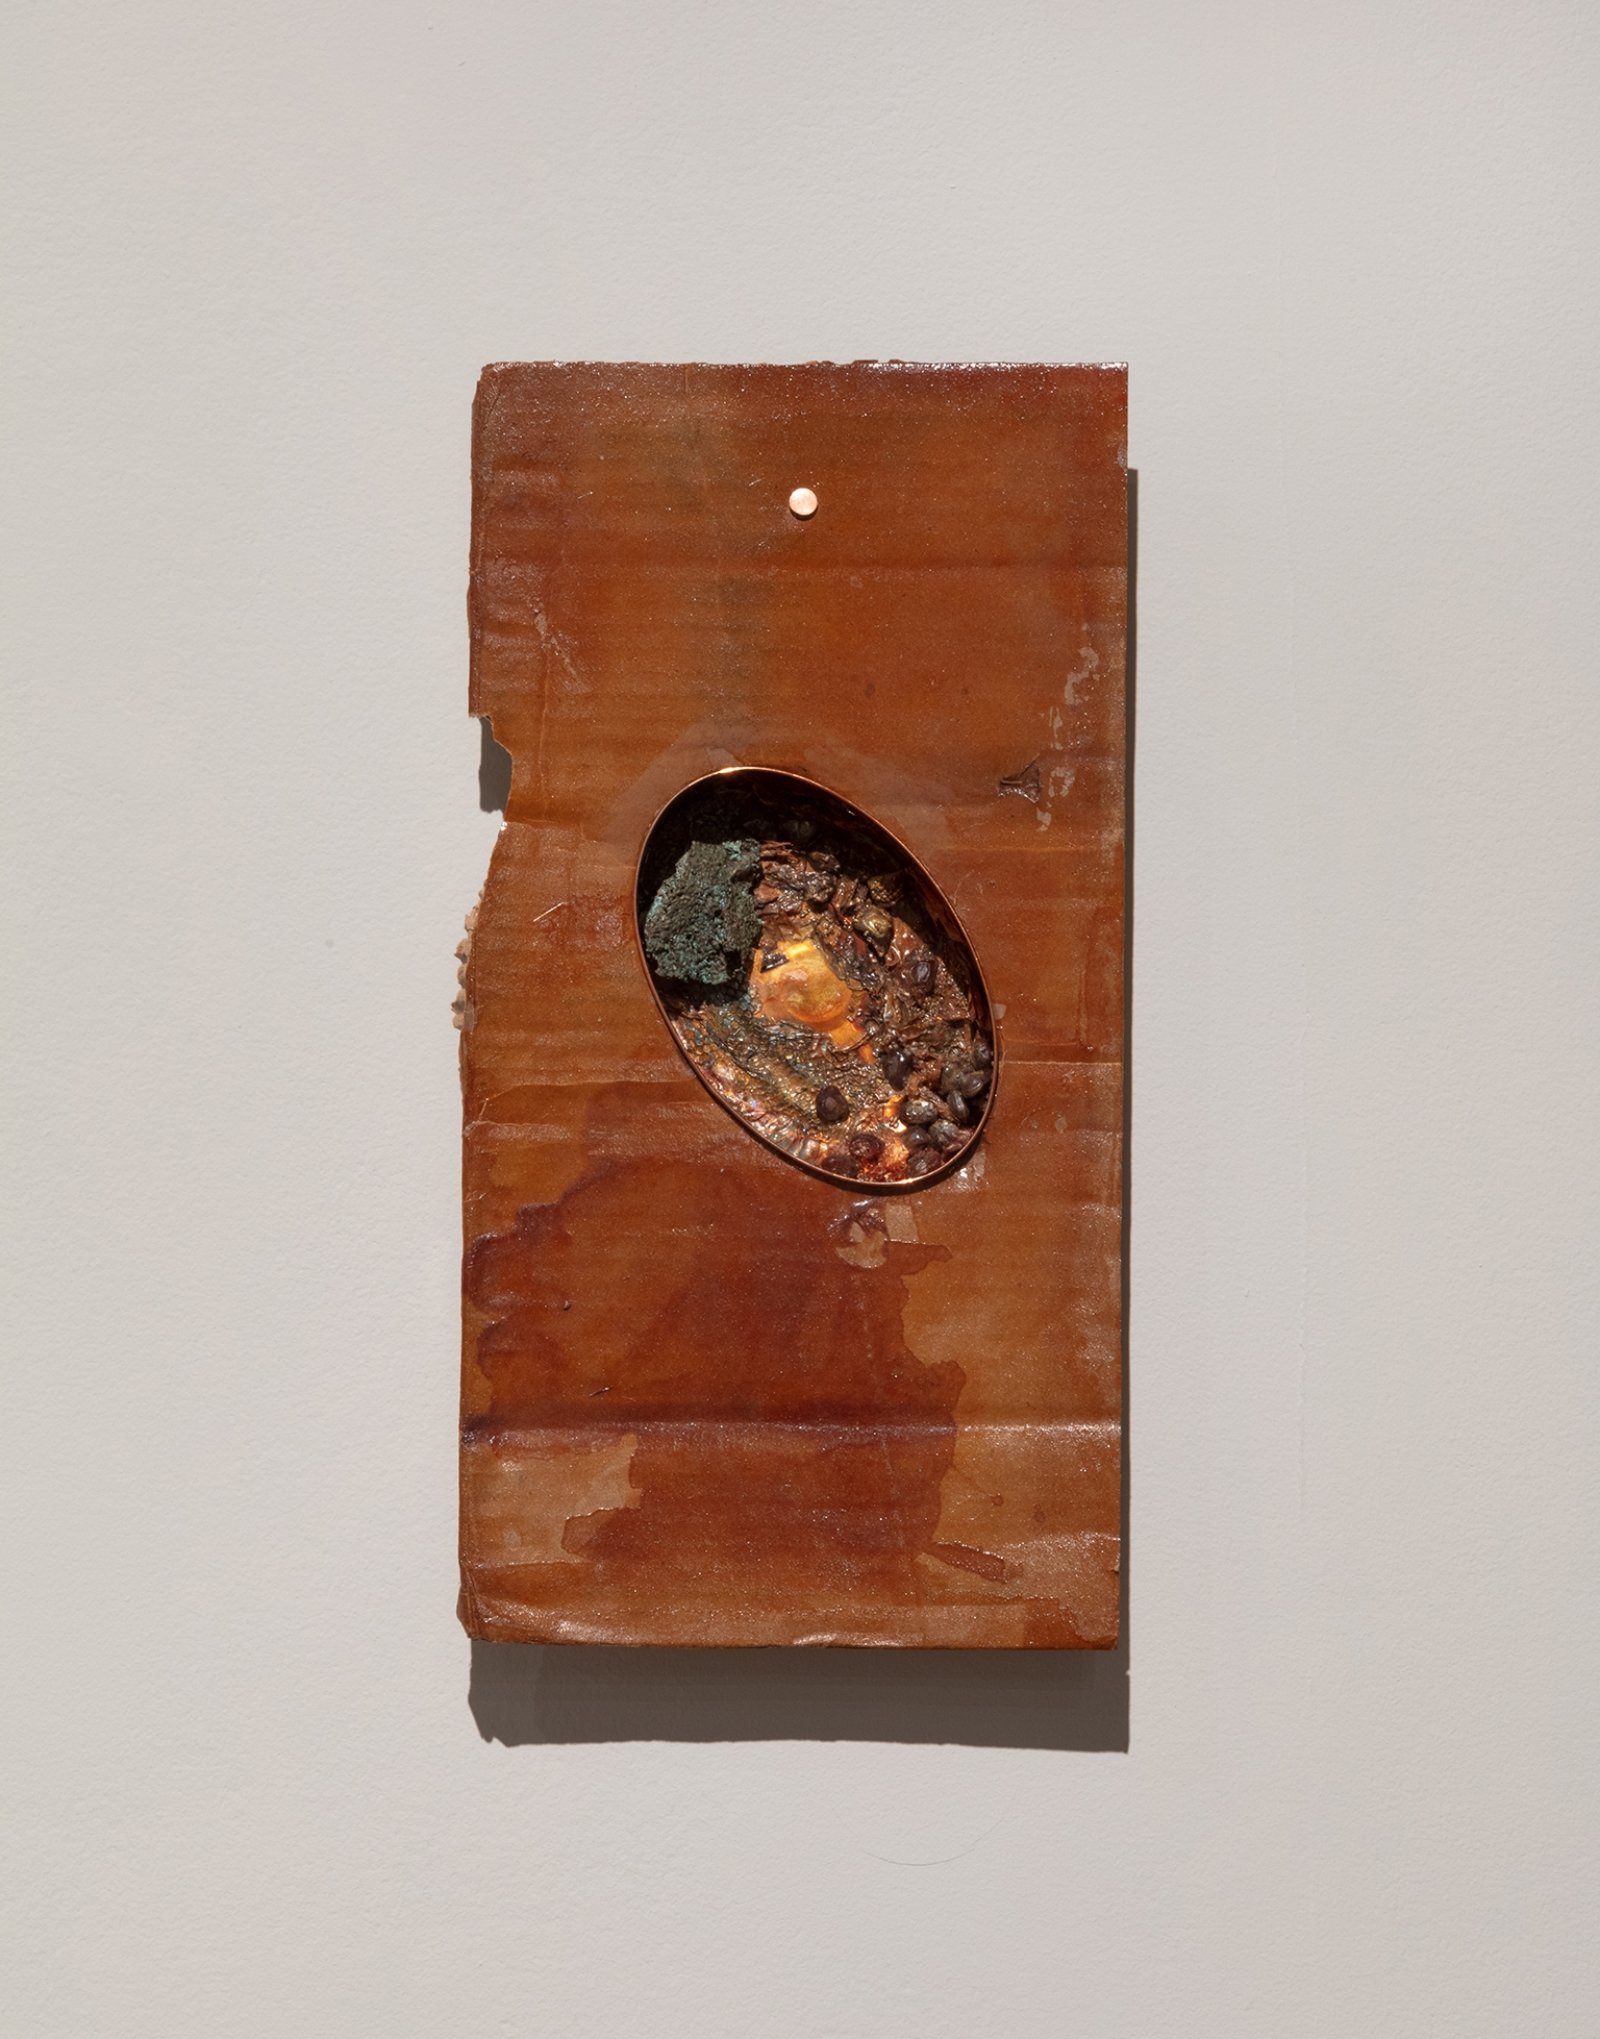 Rochelle Goldberg, Snack, 2016, chia, tamarind pits, snake shed, oxalis petals, copper nail, oxidized copper dust and shellac on cardboard, copper covered can, 17 x 11 x 3 in. (43 x 28 x 8 cm). Installation view, Waves and Waves, Oakville Galleries, Oakville, 2019